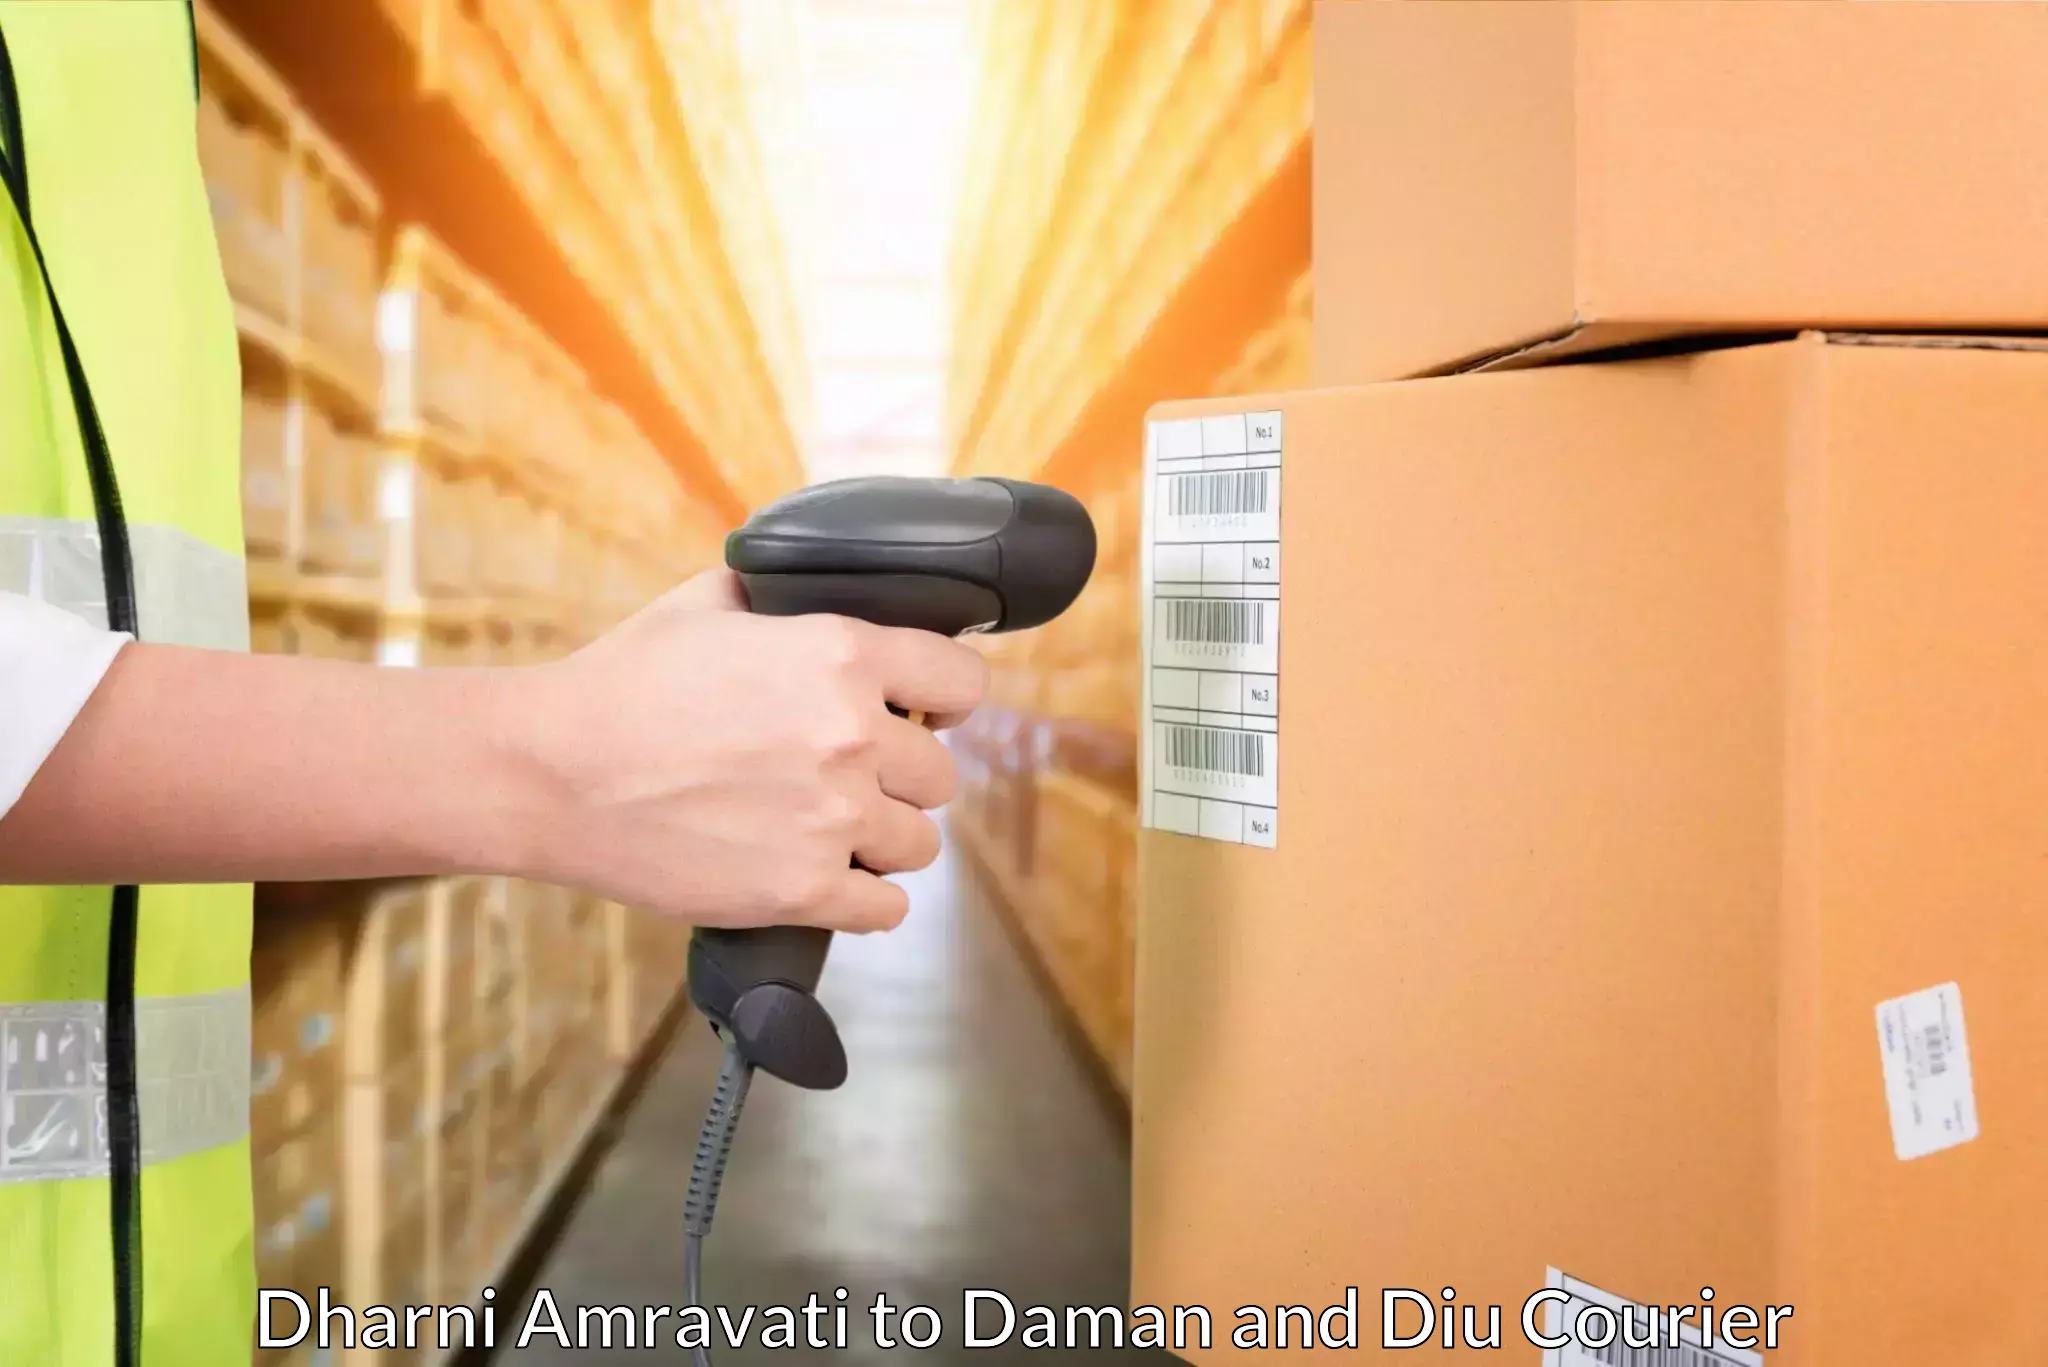 State-of-the-art courier technology Dharni Amravati to Daman